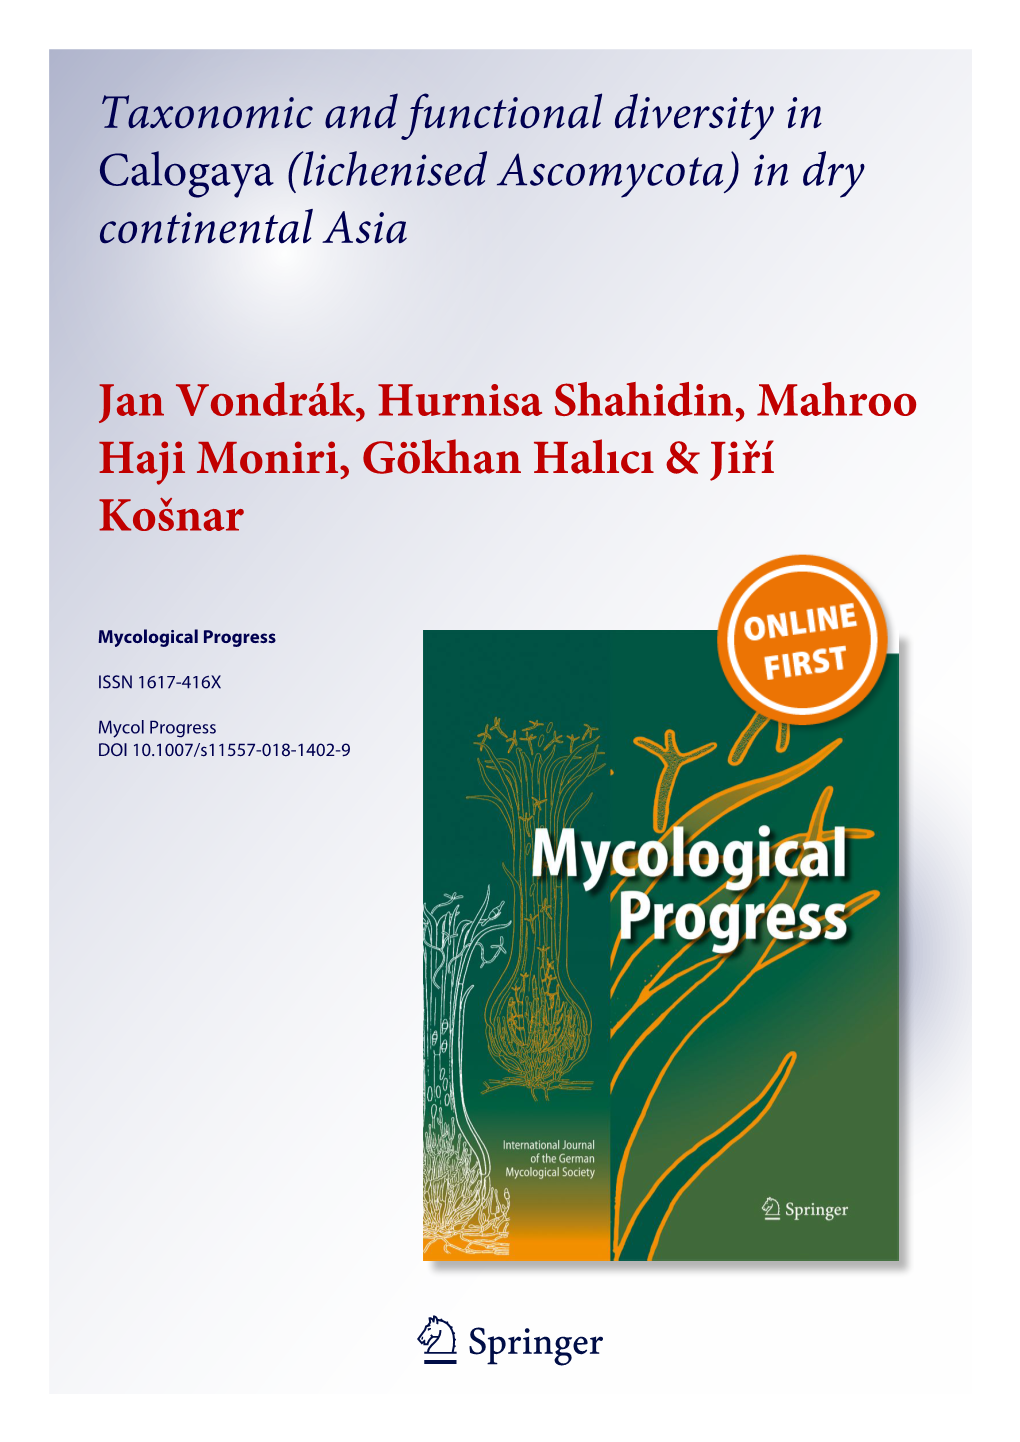 Taxonomic and Functional Diversity in Calogaya (Lichenised Ascomycota) in Dry Continental Asia